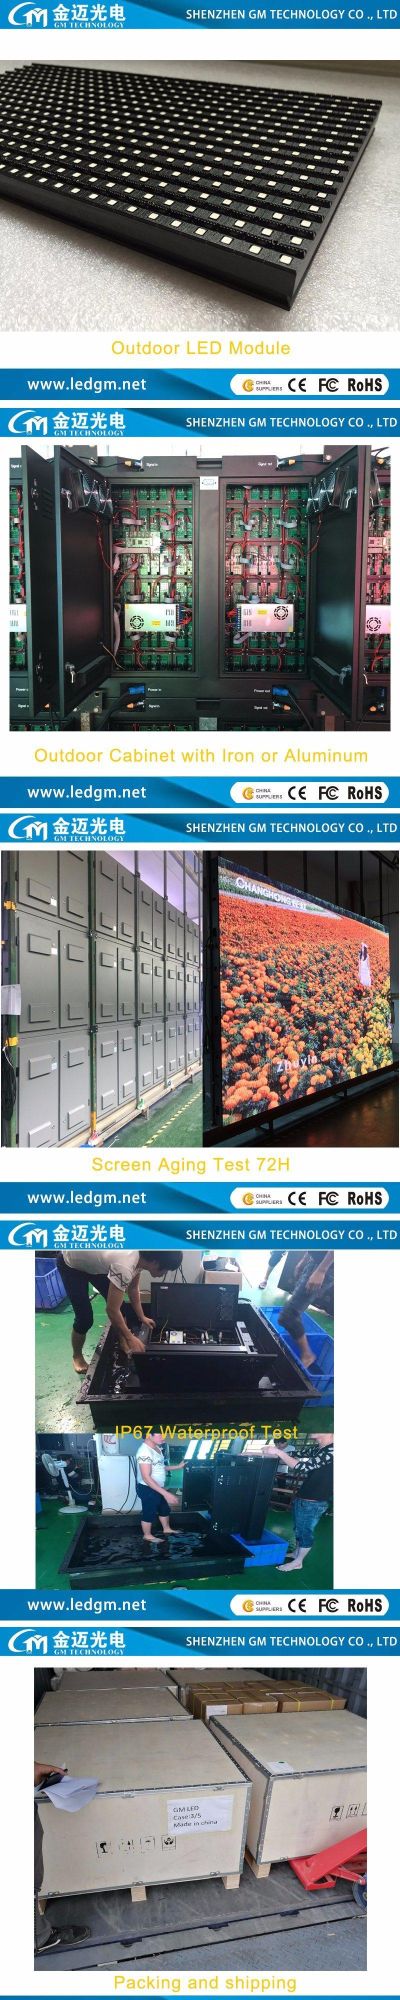 Outdoor Full Color Nation Star P3 P4 P5 P6 P8 P10 P16 P20 P25 LED Display for Advertising Screen Panel Sign